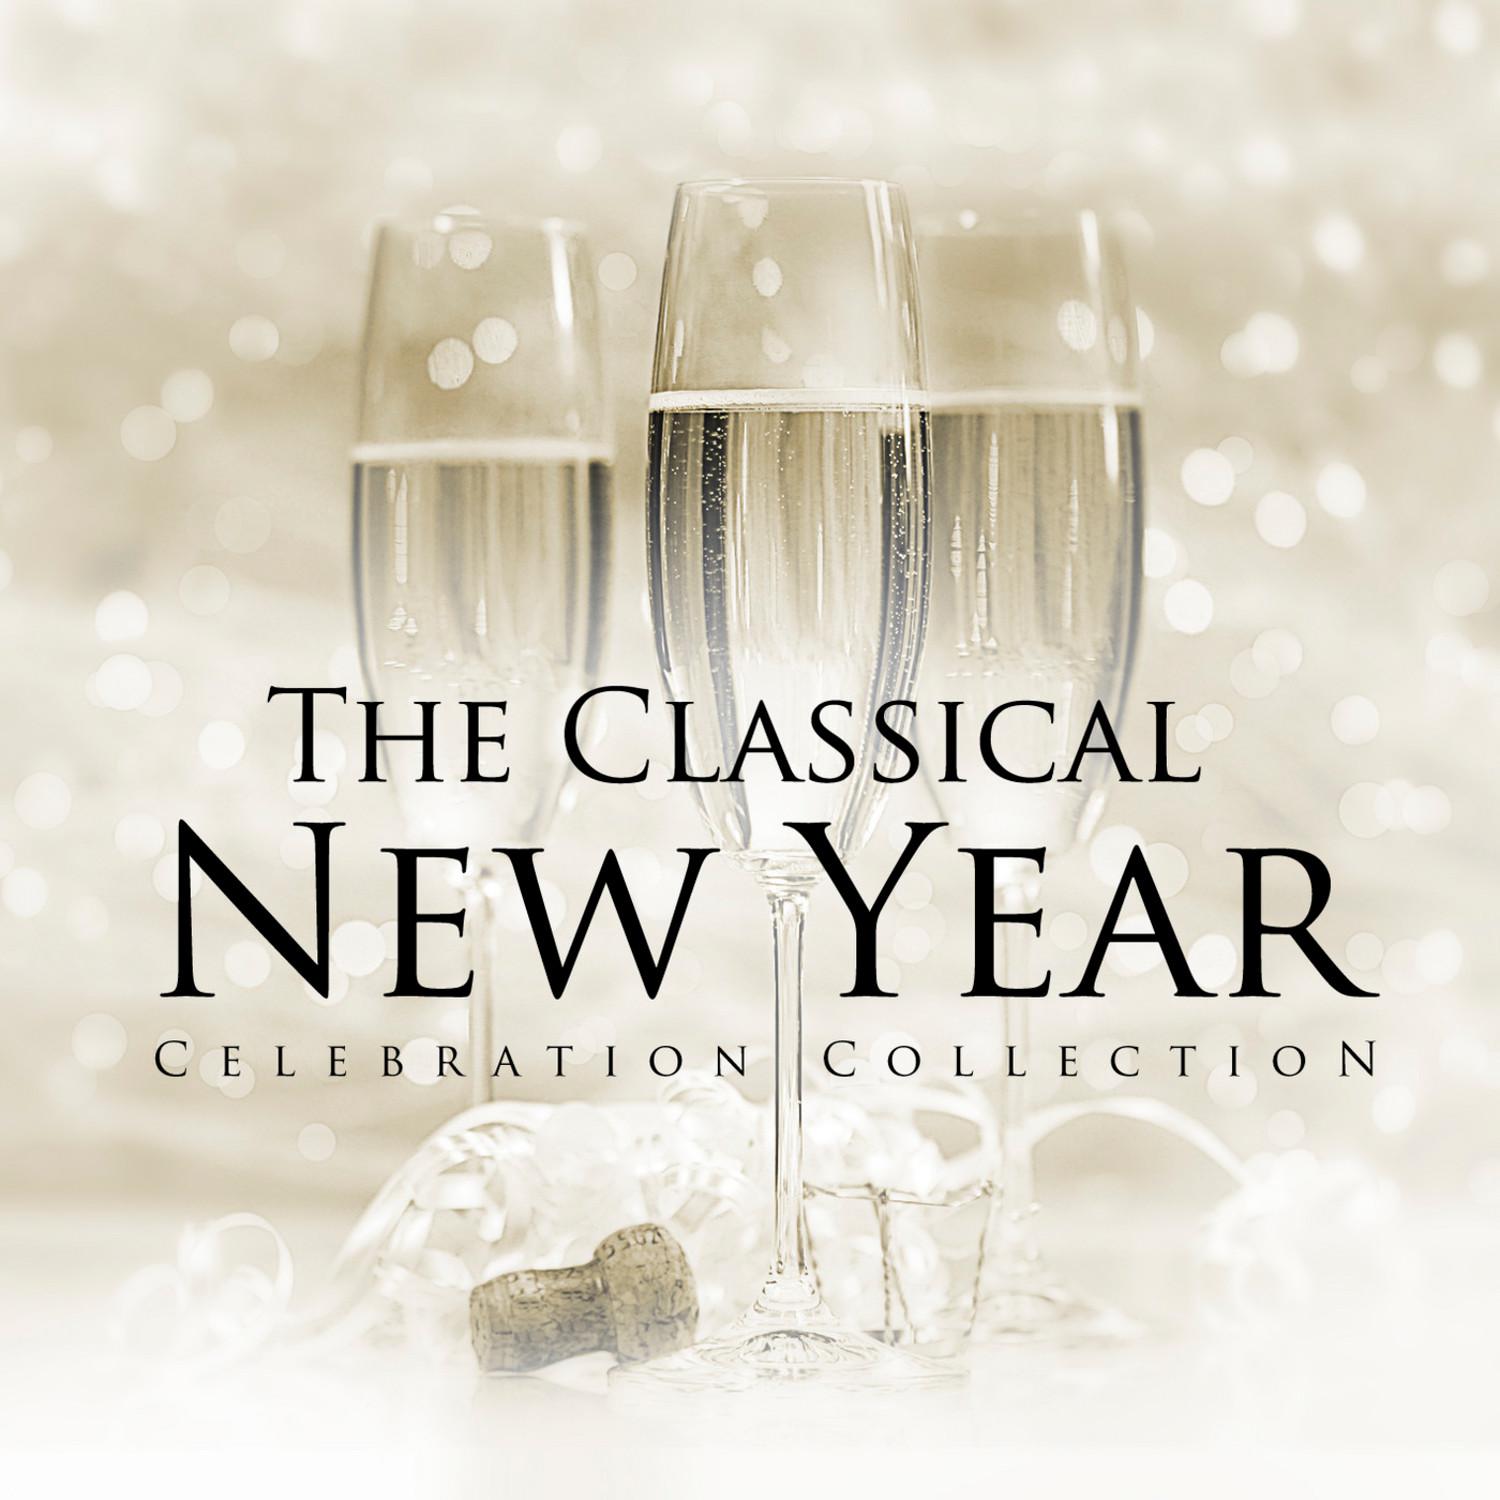 The Classical New Year Celebration Collection